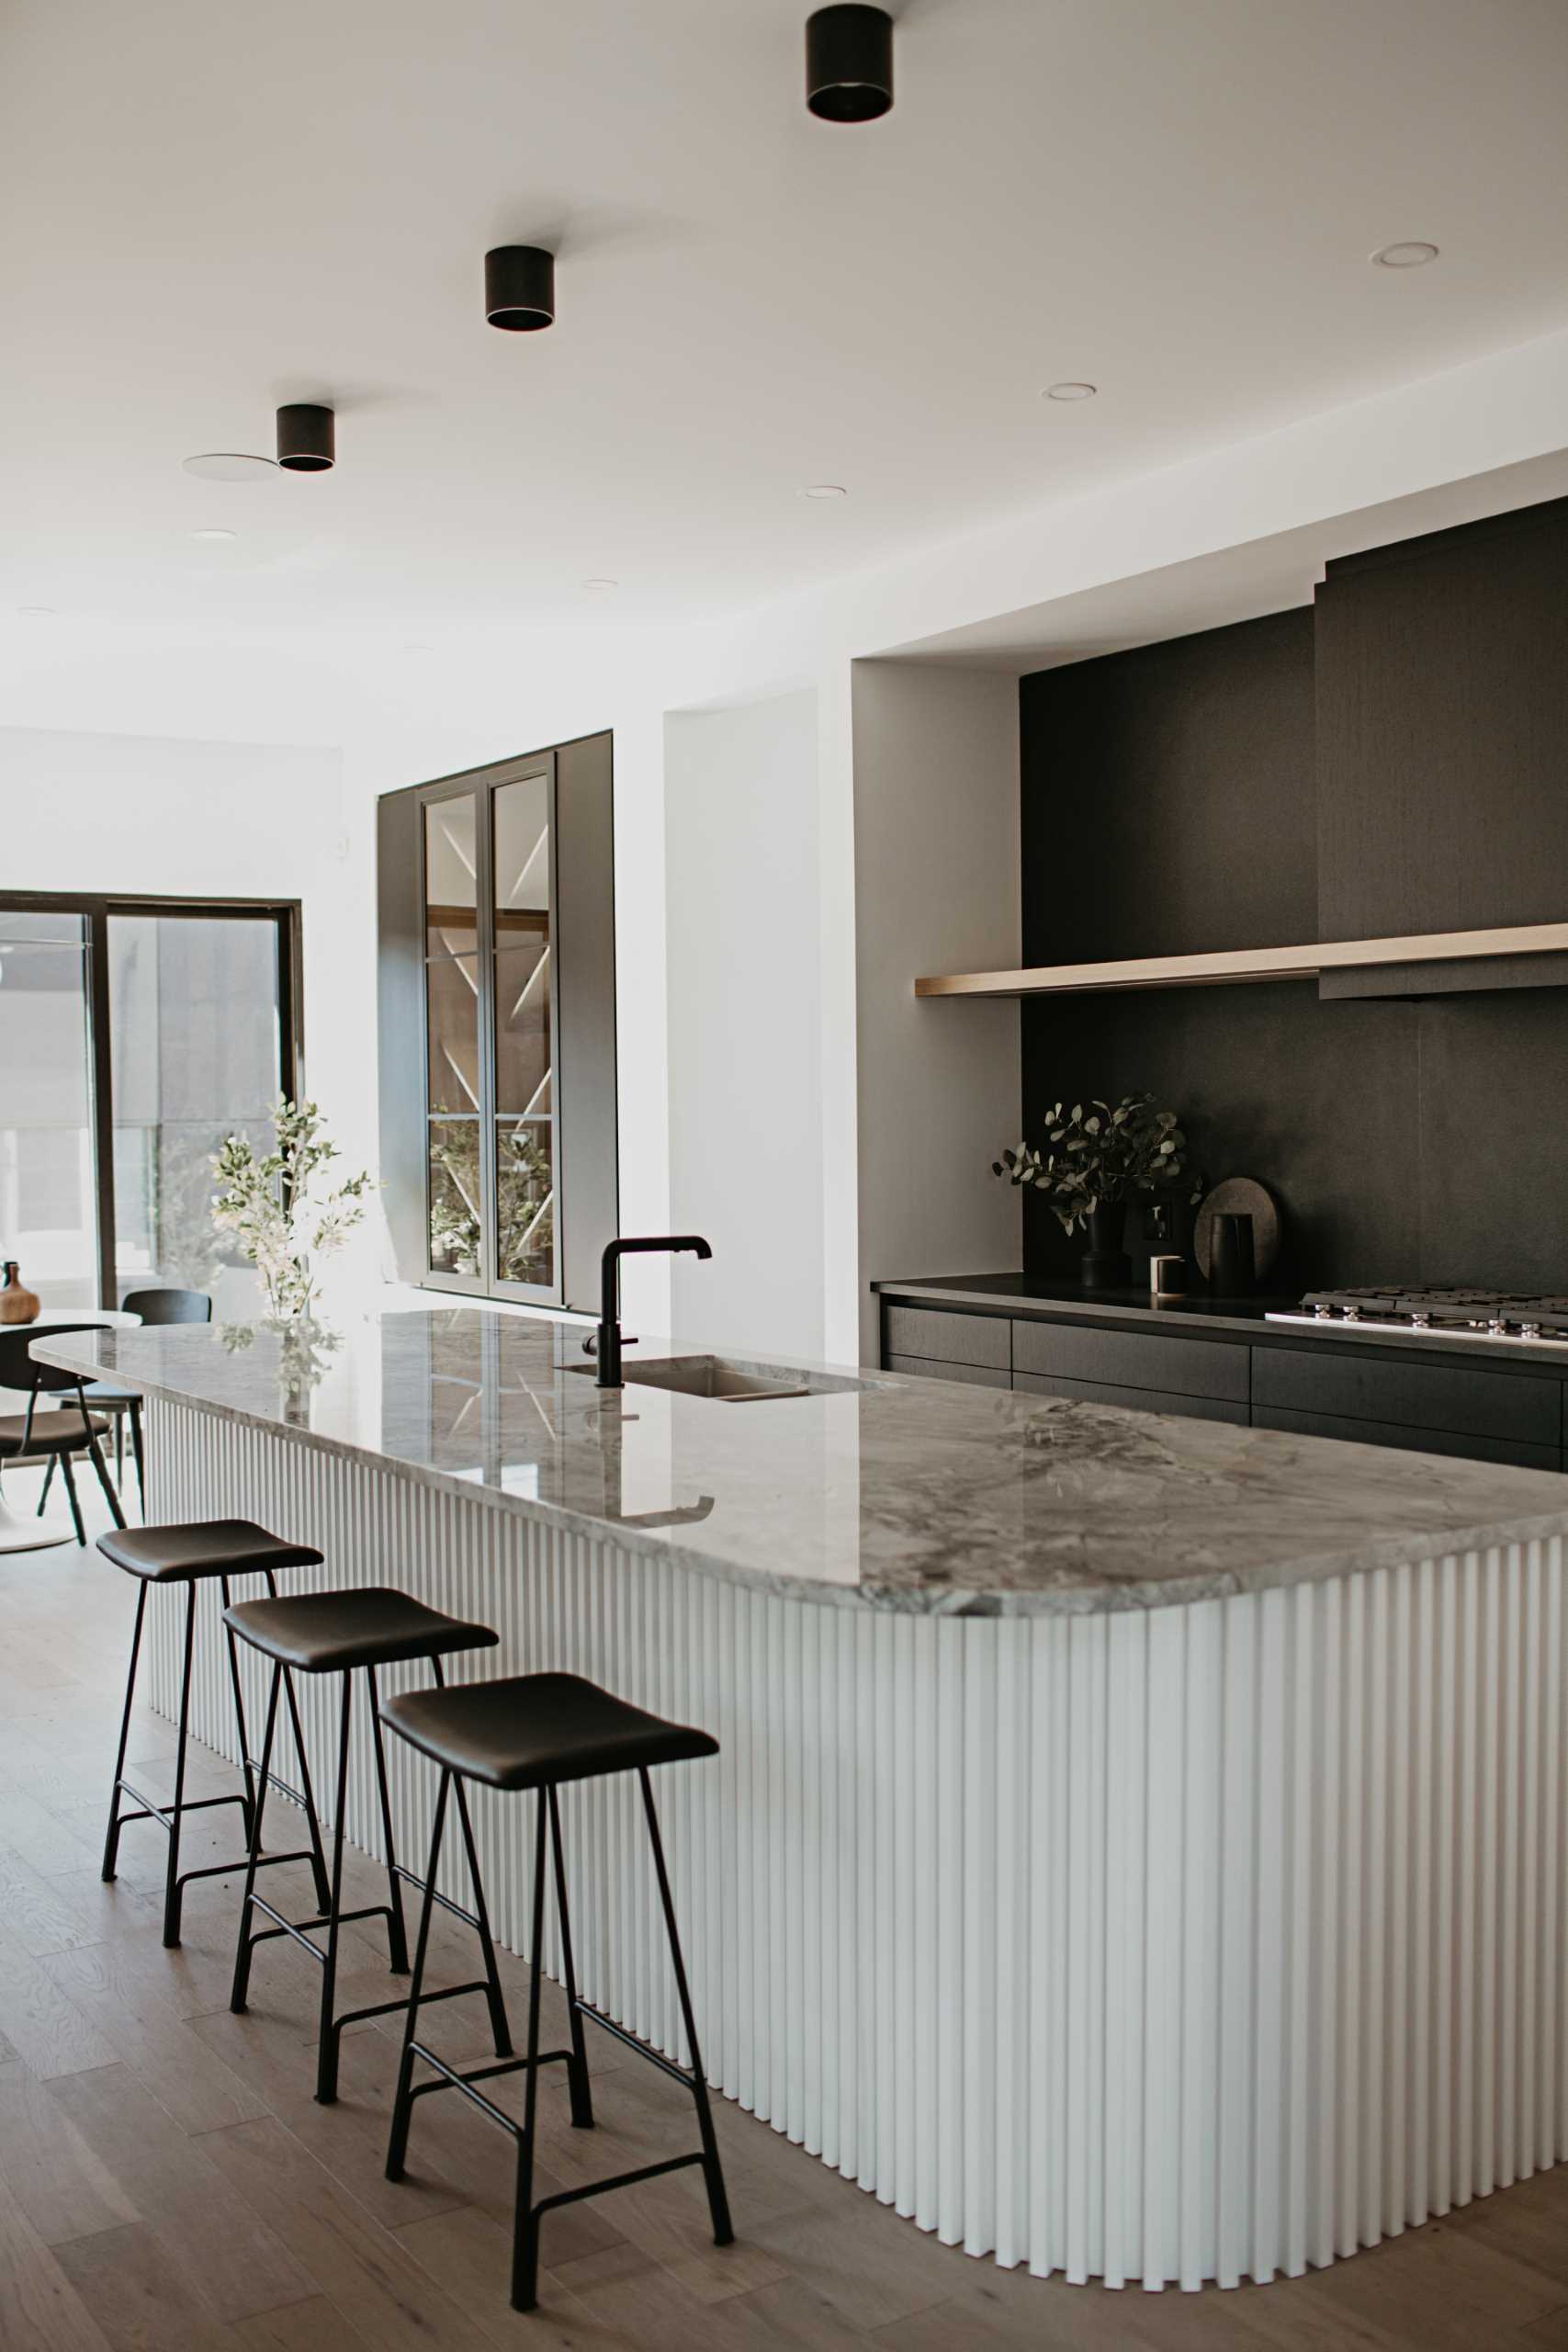 The design of this modern kitchen has a highly contrasting black and white look. To soften the starkness, a curve in the super white dolomite countertop on the island is replicated onto a base with painted wood slats.